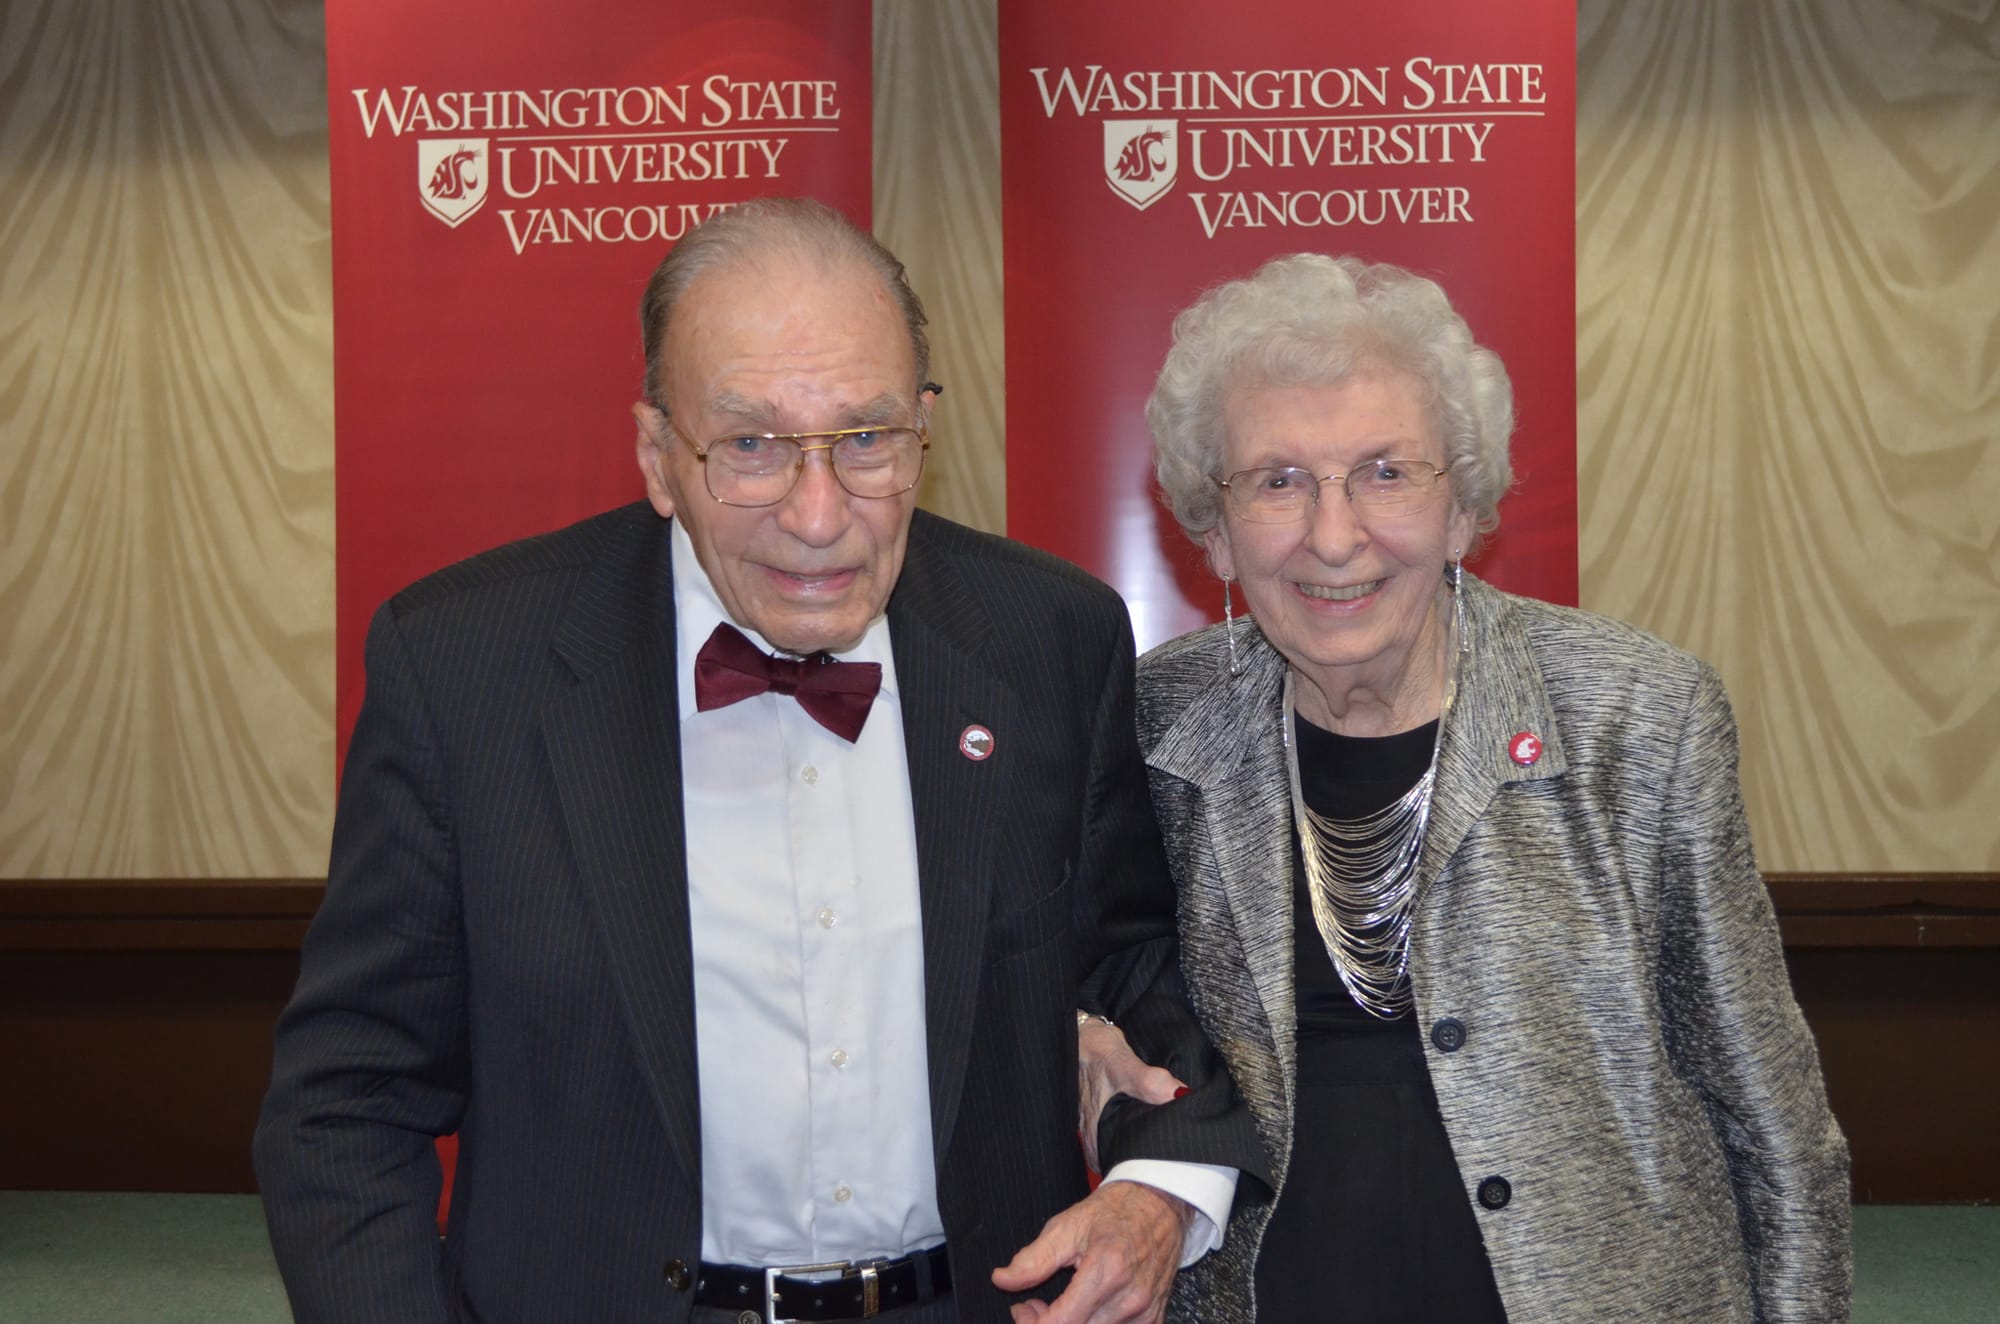 Dan and Val Ogden met in 1946, when Val was a senior at Washington State University. Dan Ogden had been corresponding with her college roommate at the time. After Val graduated and moved to Spokane, &quot;I called her up and asked her for a date and we went dancing. And we went on from there,&quot; Dan said.